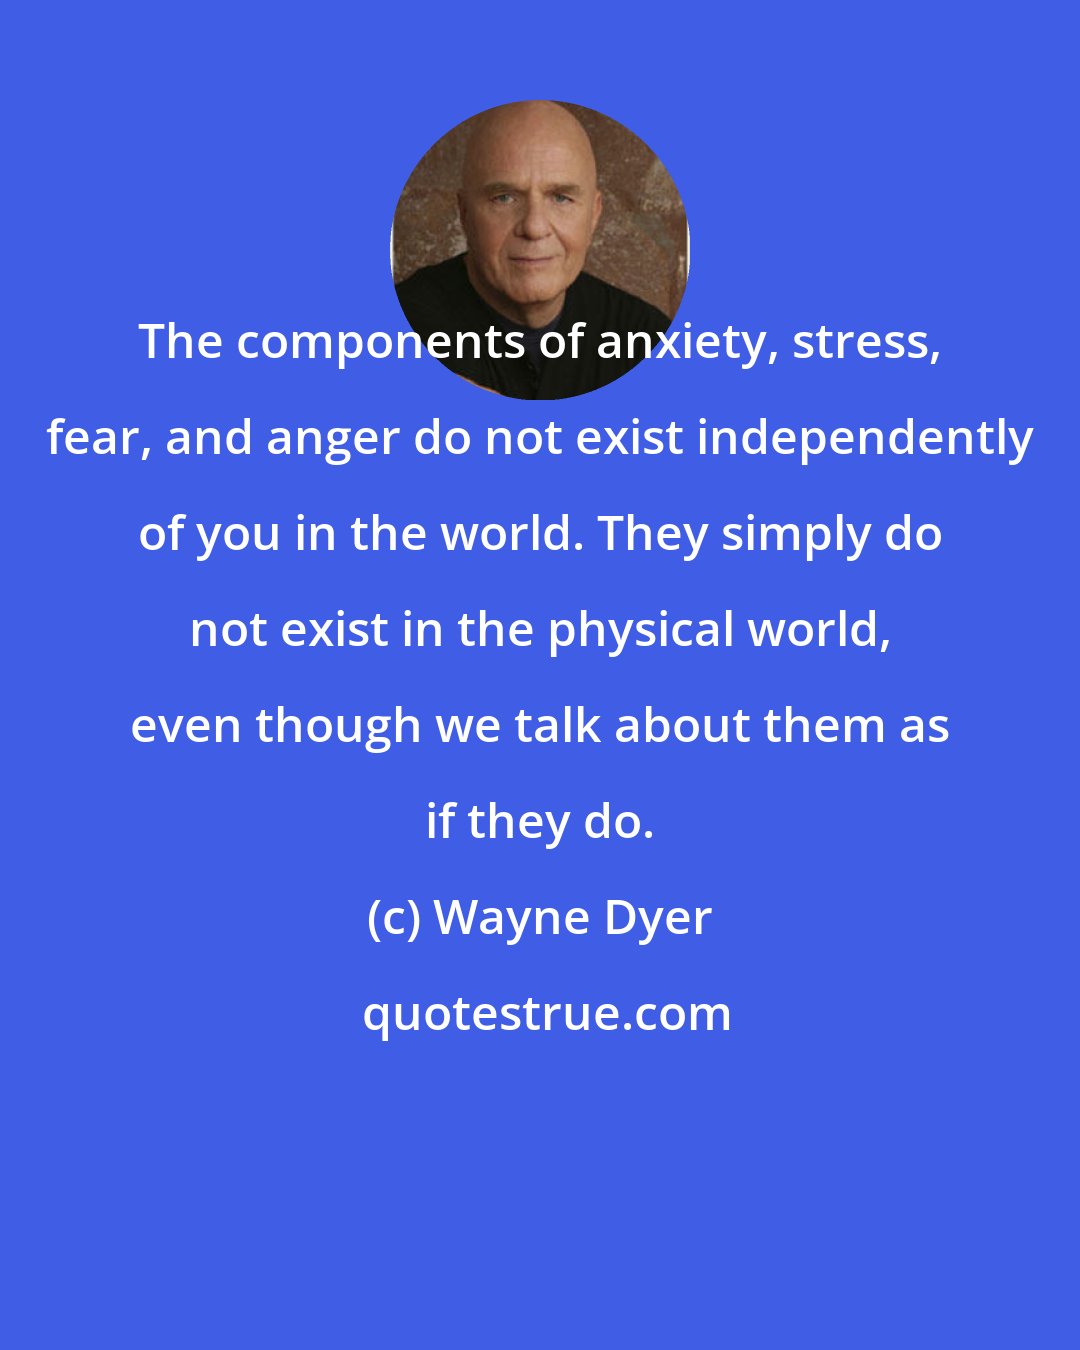 Wayne Dyer: The components of anxiety, stress, fear, and anger do not exist independently of you in the world. They simply do not exist in the physical world, even though we talk about them as if they do.